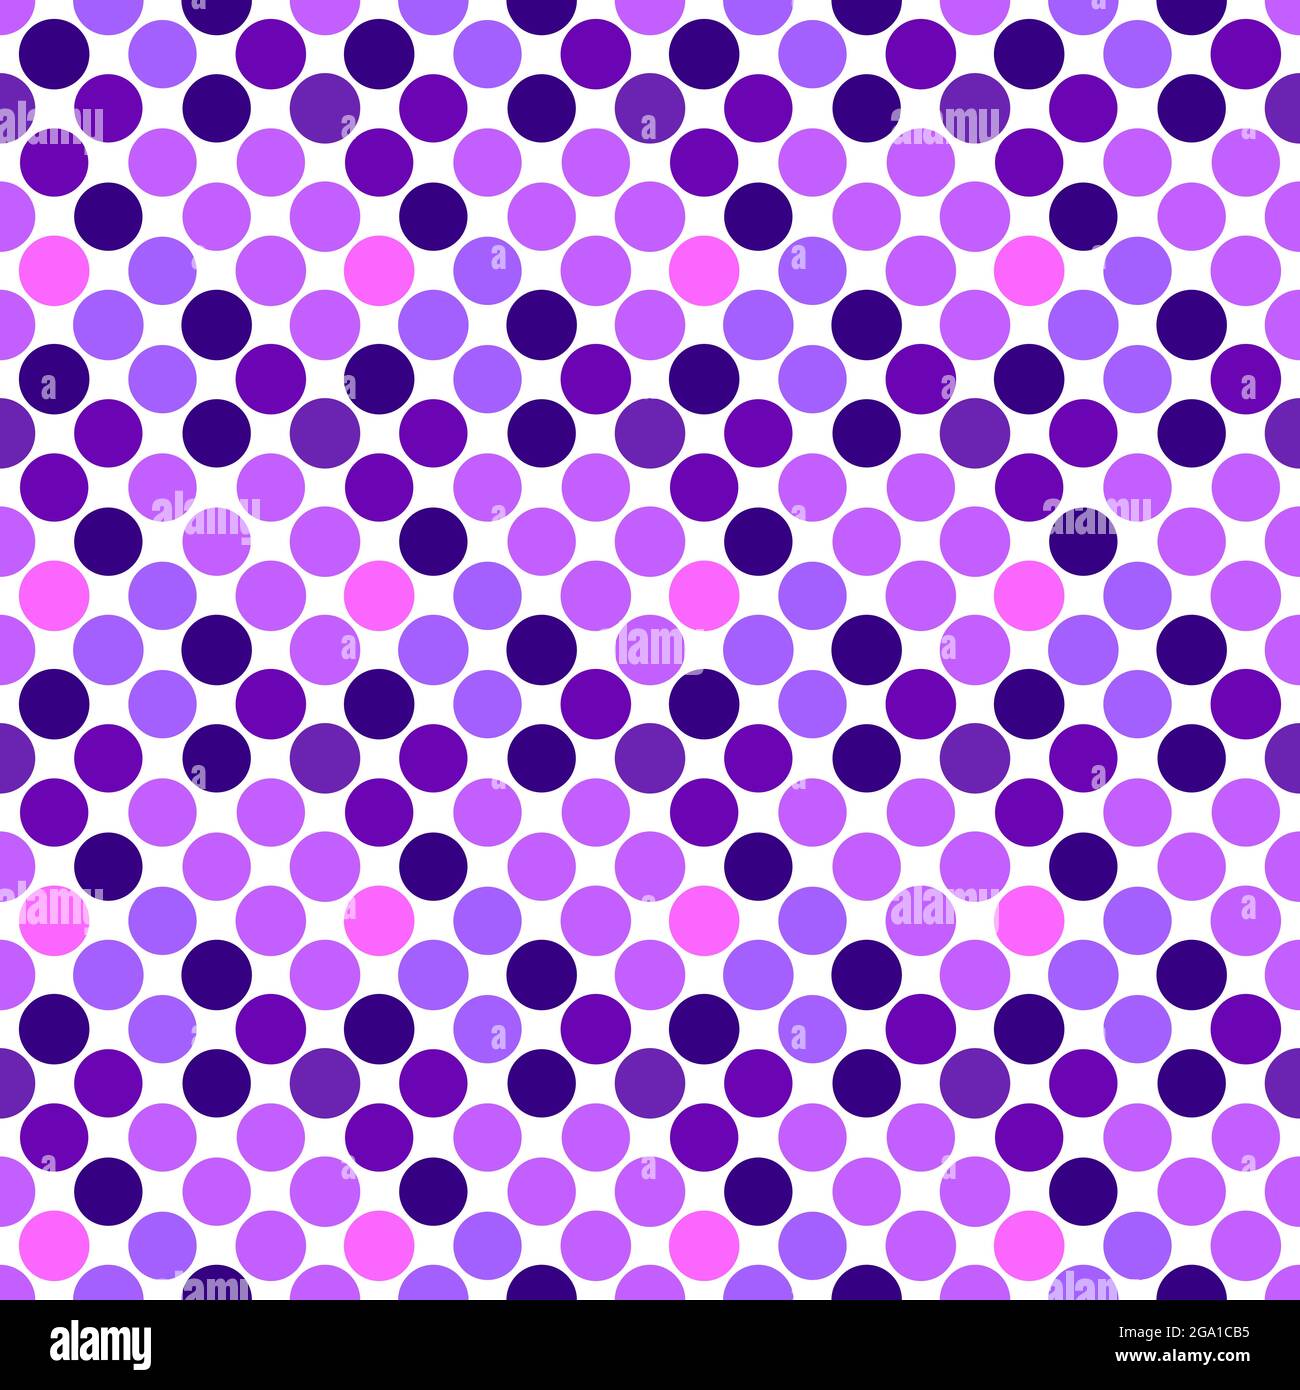 Dot pattern background - colorful geometrical abstract vector design Stock Vector